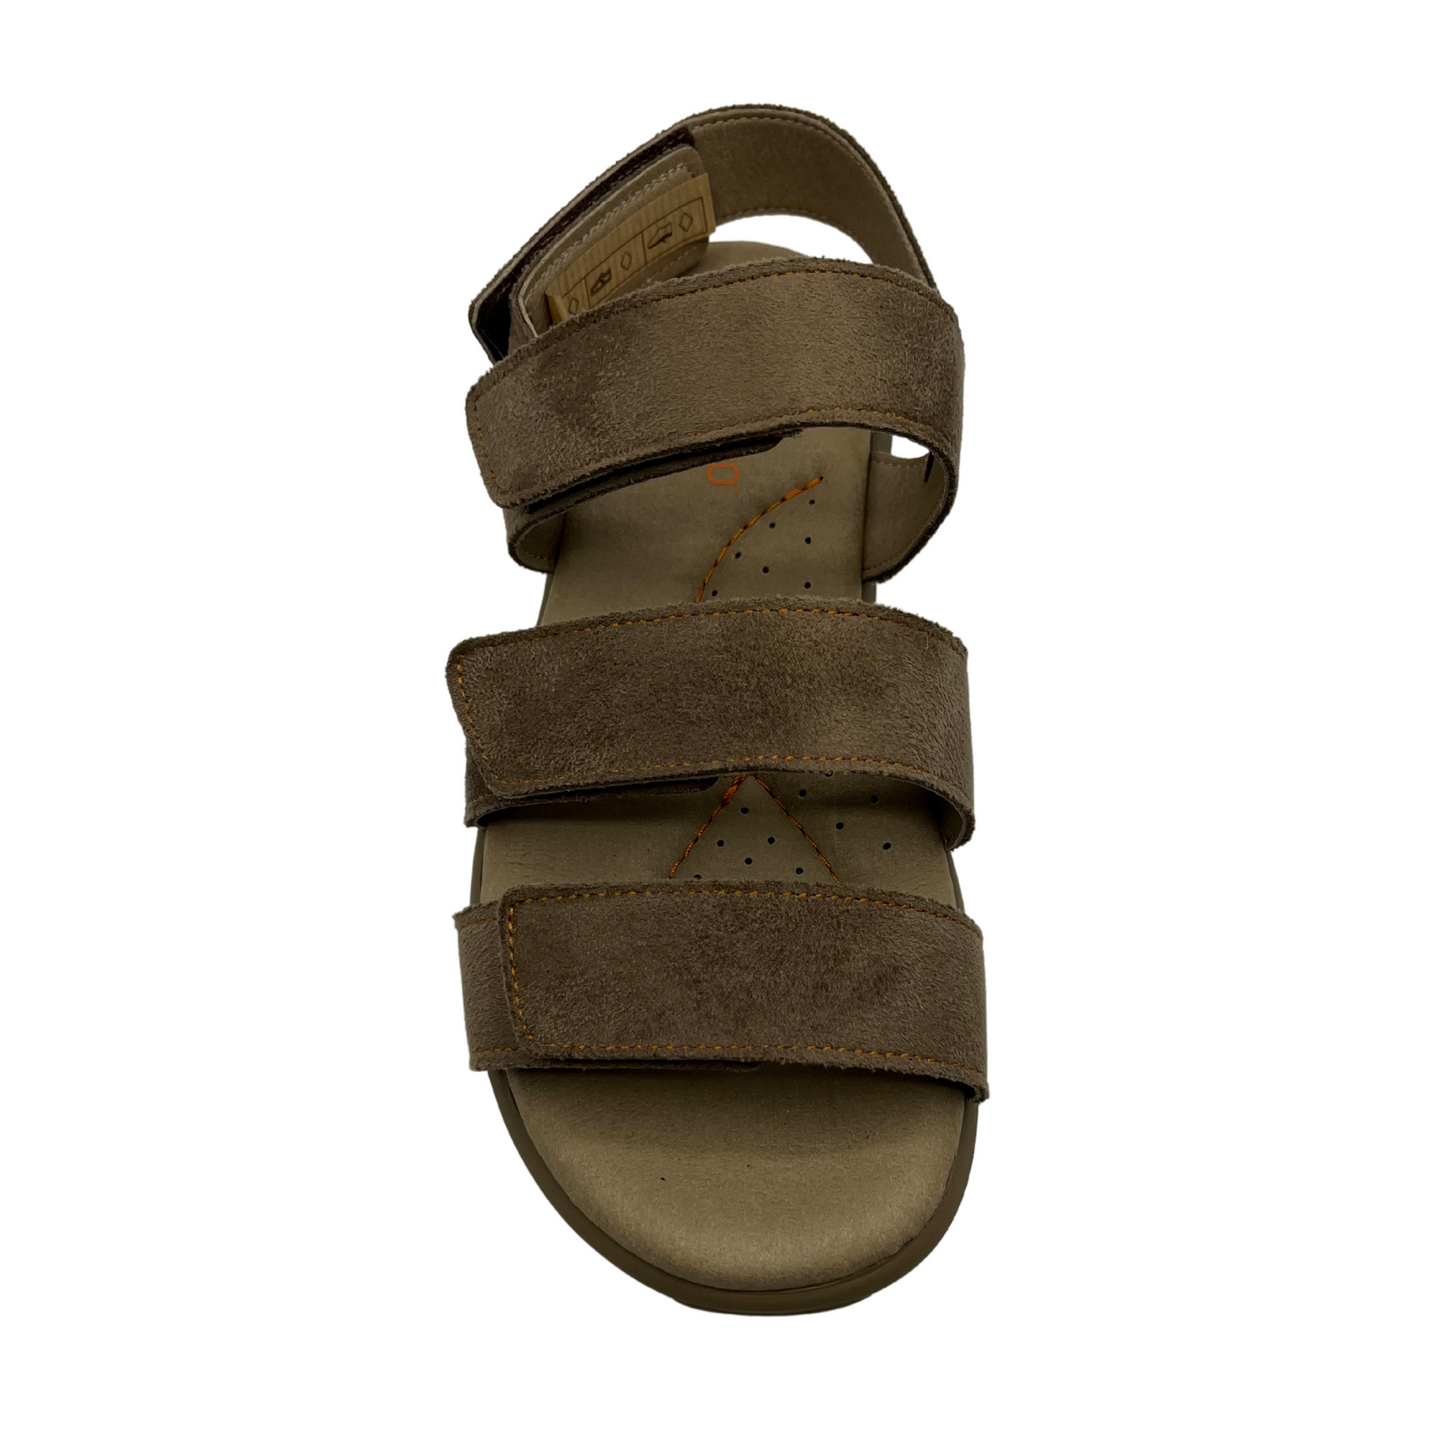 Top view of taupe leather sandals with 4 adjustable velcro straps. Cushioned footbed and open toe.